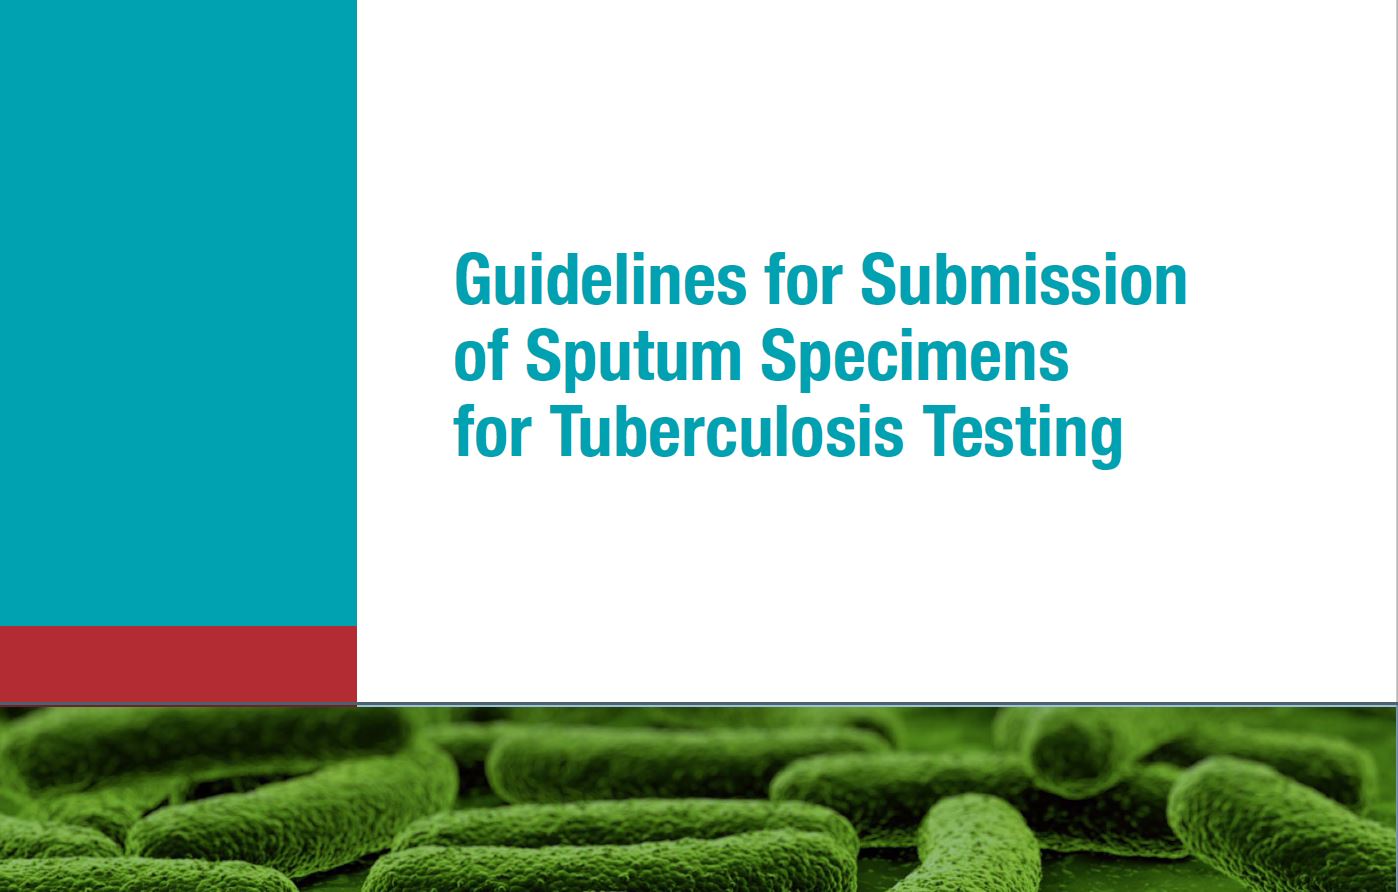 Guidelines for Submission of Sputum Specimens for Tuberculosis Testing